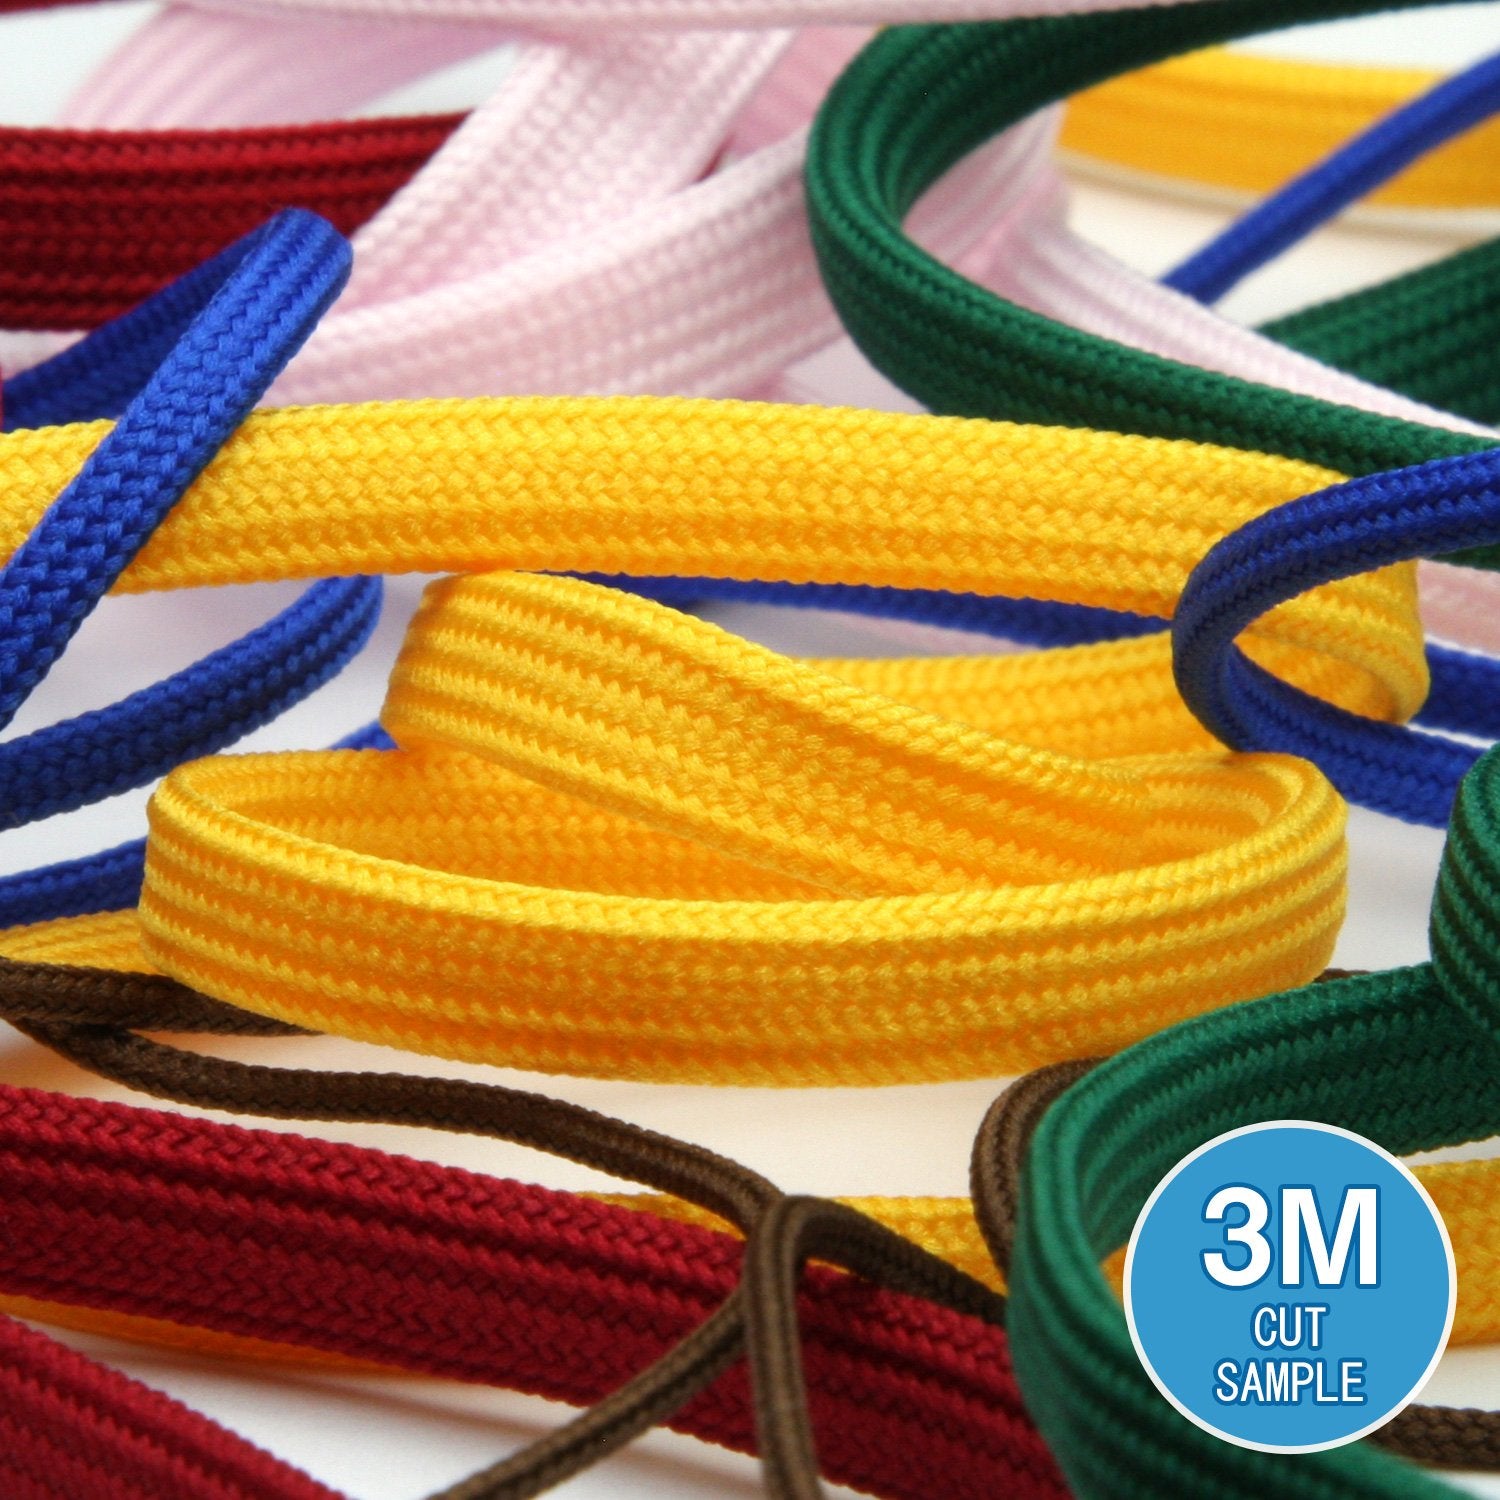 FUJIYAMA RIBBON [Sample] Polyester Spindle Cord (FY-18848) approx.2mm 3 Meters Cut